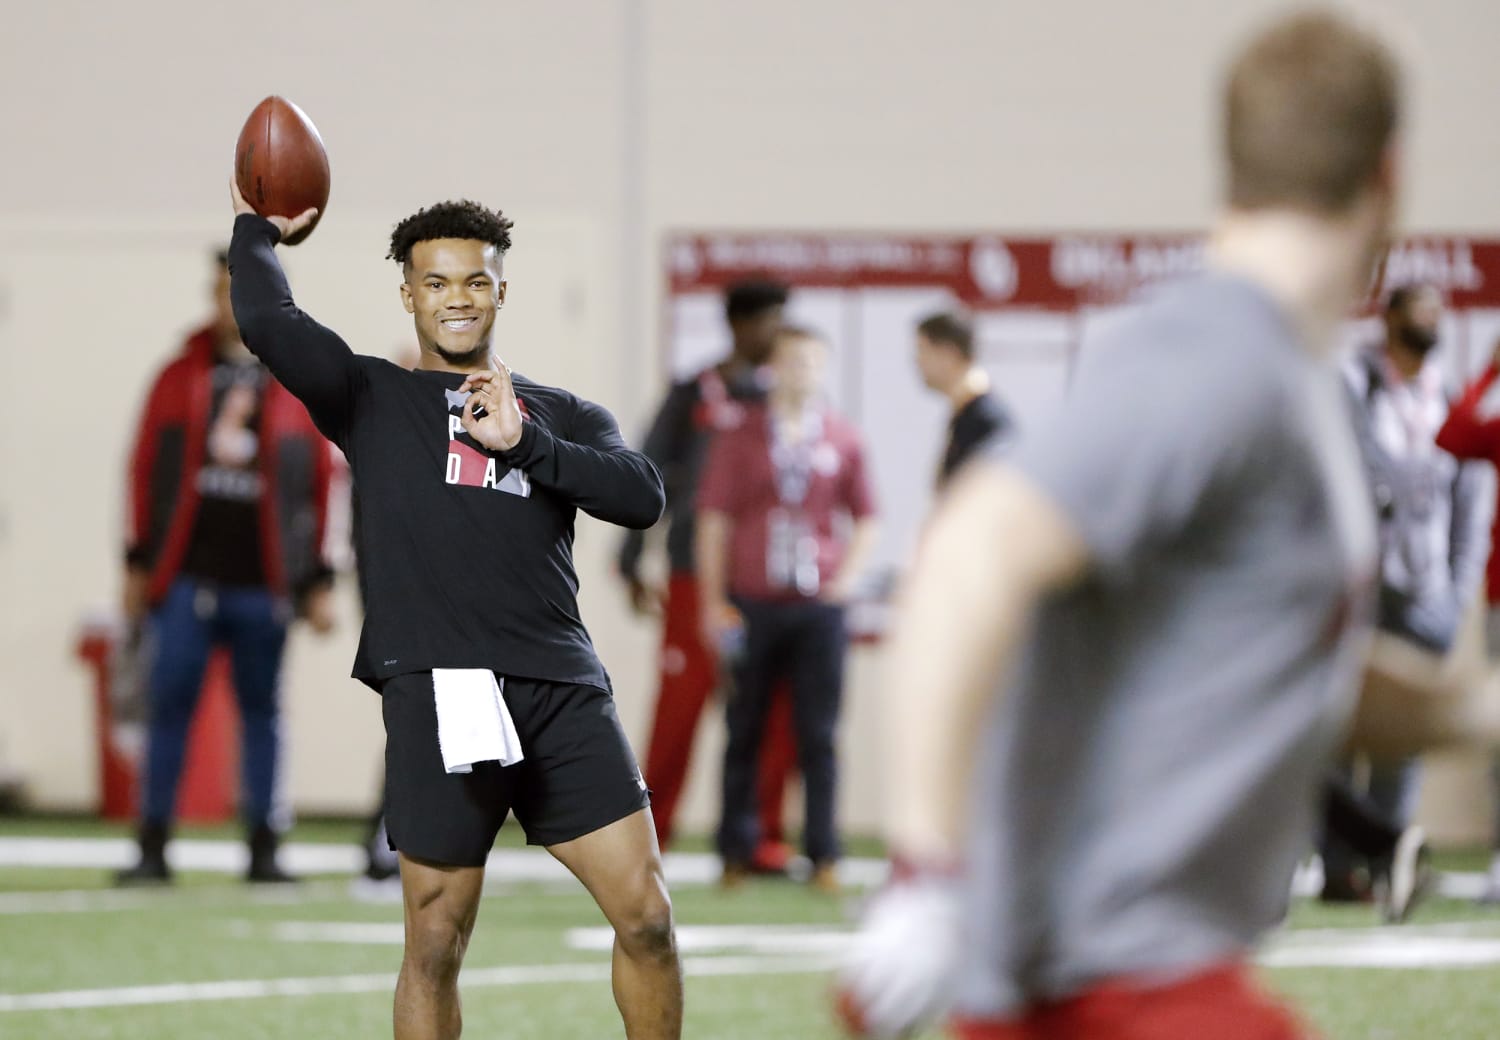 NFL Draft: Kyler Murray drafted No. 1, followed by Bosa and Williams